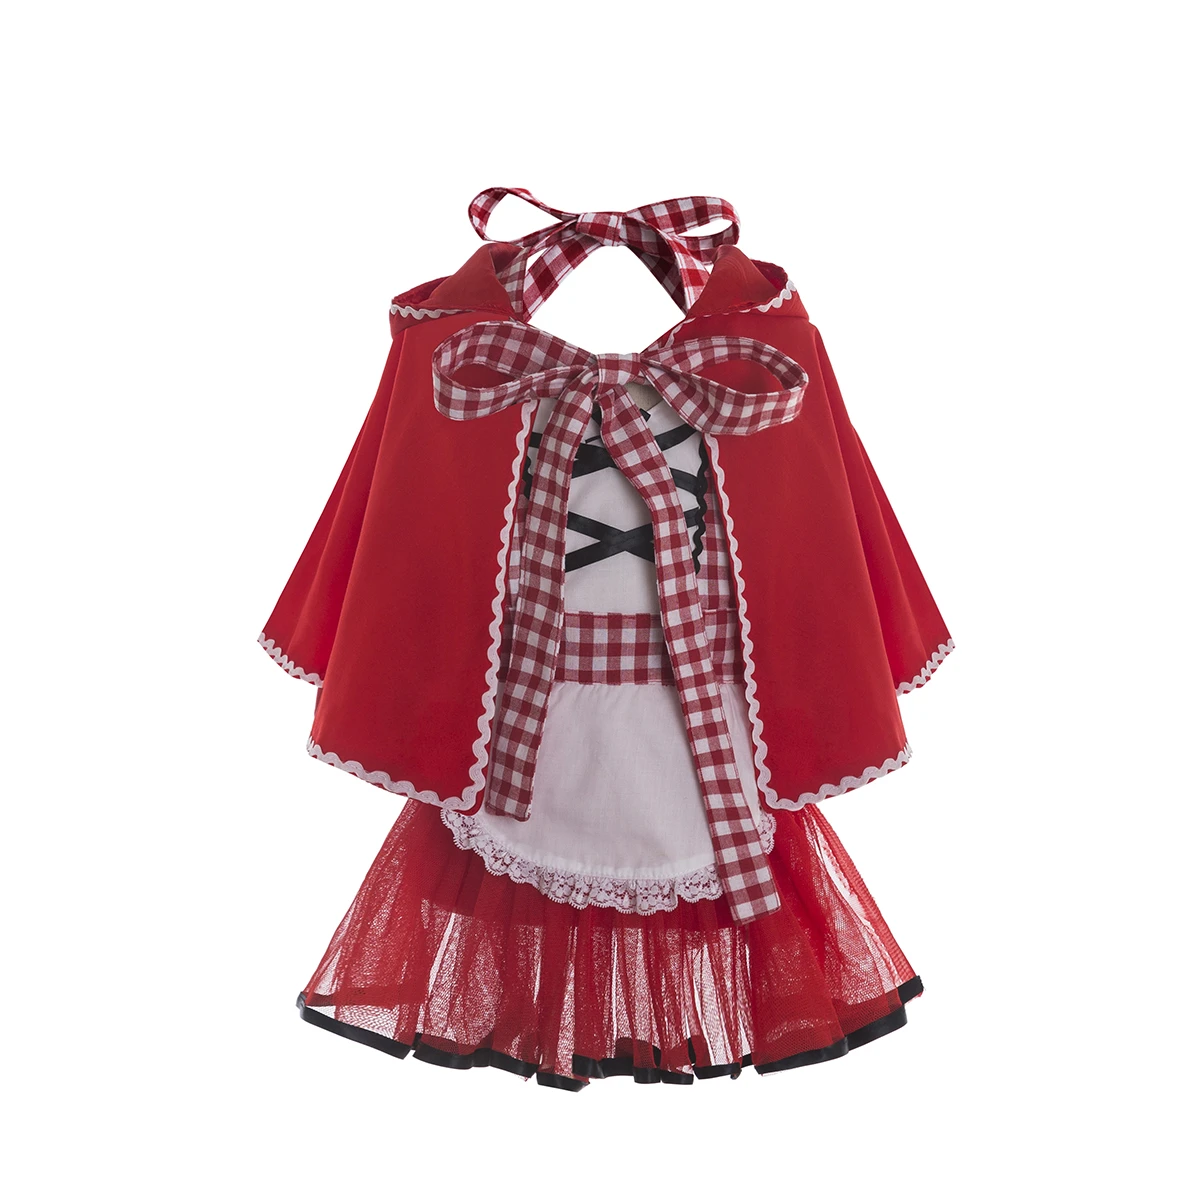 Red Riding Hood Cape Childrens Costume Child Kids Toddler Red Riding Hood Cape Childrens Costume Child Kids Toddler matching family christmas outfits